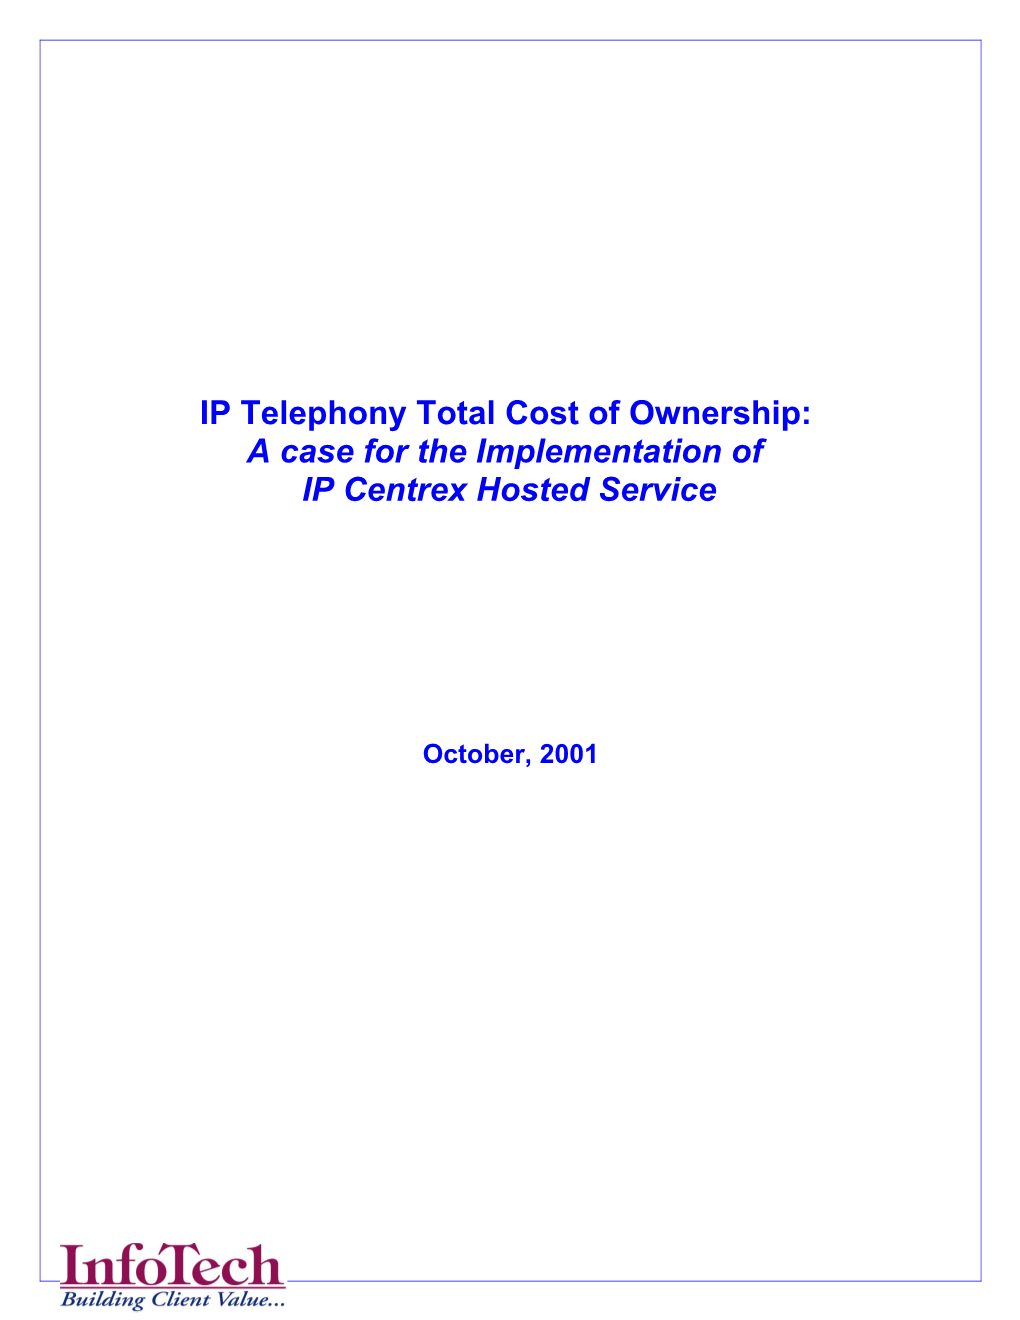 IP Telephony Total Cost of Ownership: a Case for the Implementation of IP Centrex Hosted Service